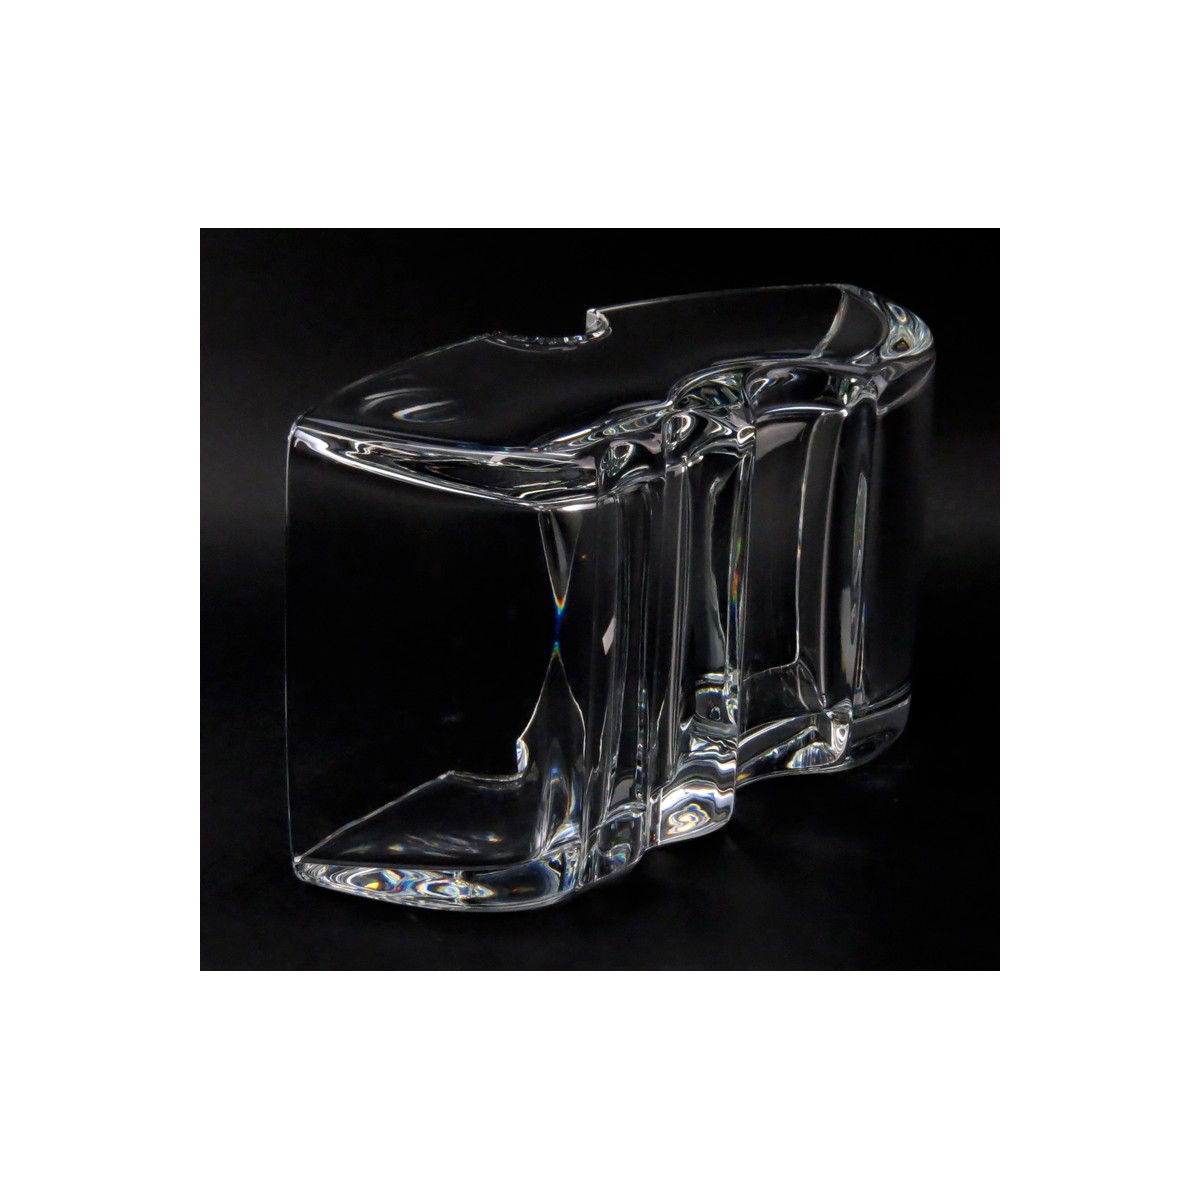 Large Baccarat "Oceanie" Clear Crystal Centerpiece in Original Box #722448. Stamped on obverse side